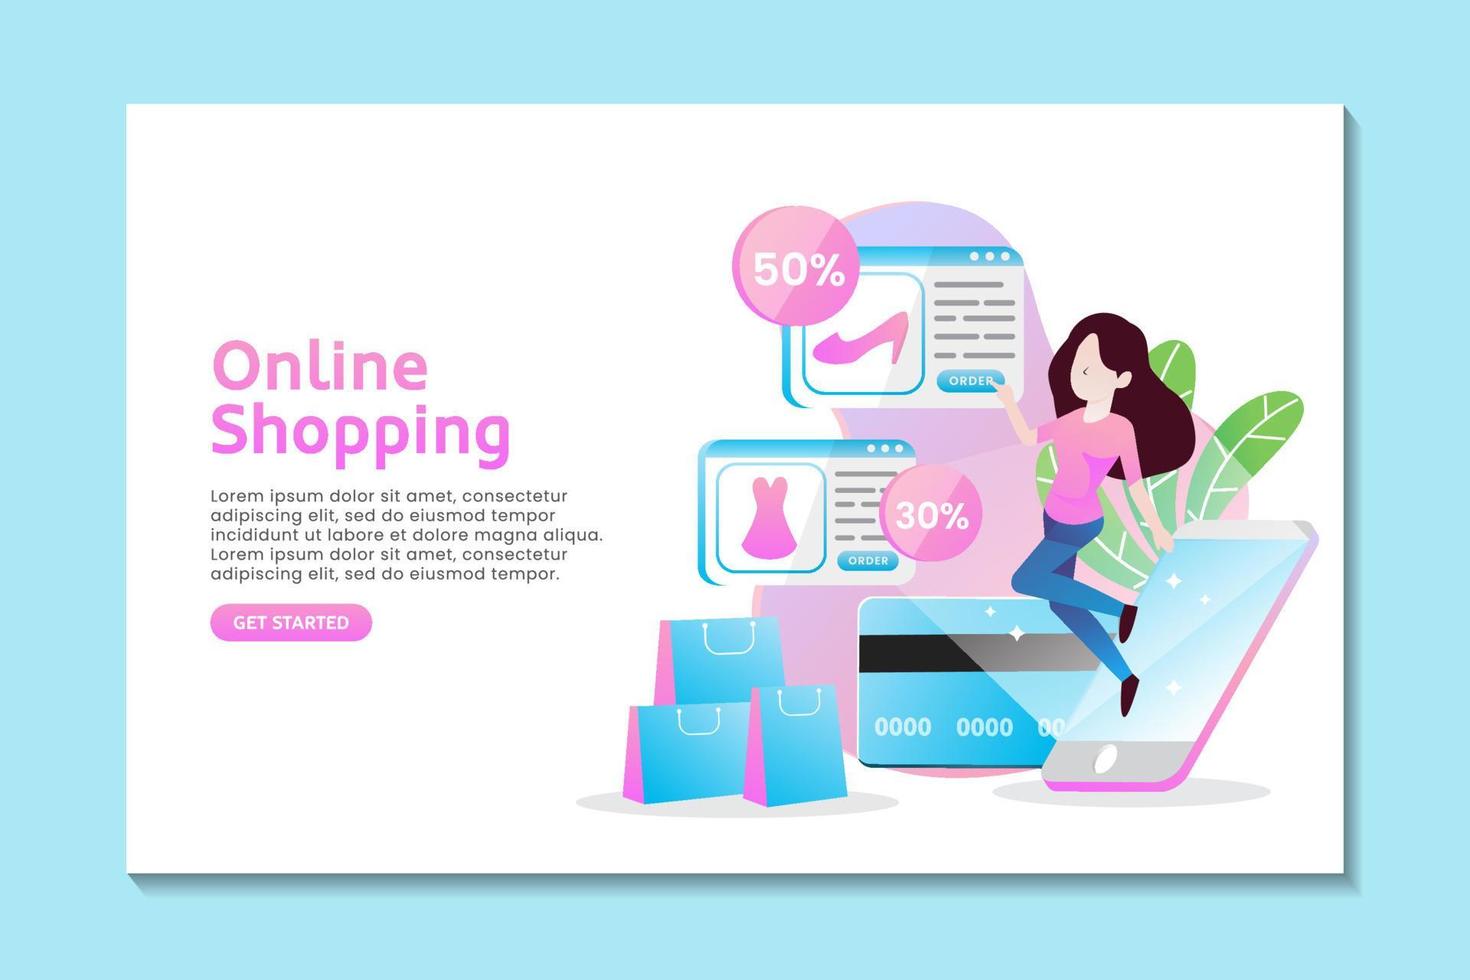 landing page concept girl do online shopping with smartphone vector